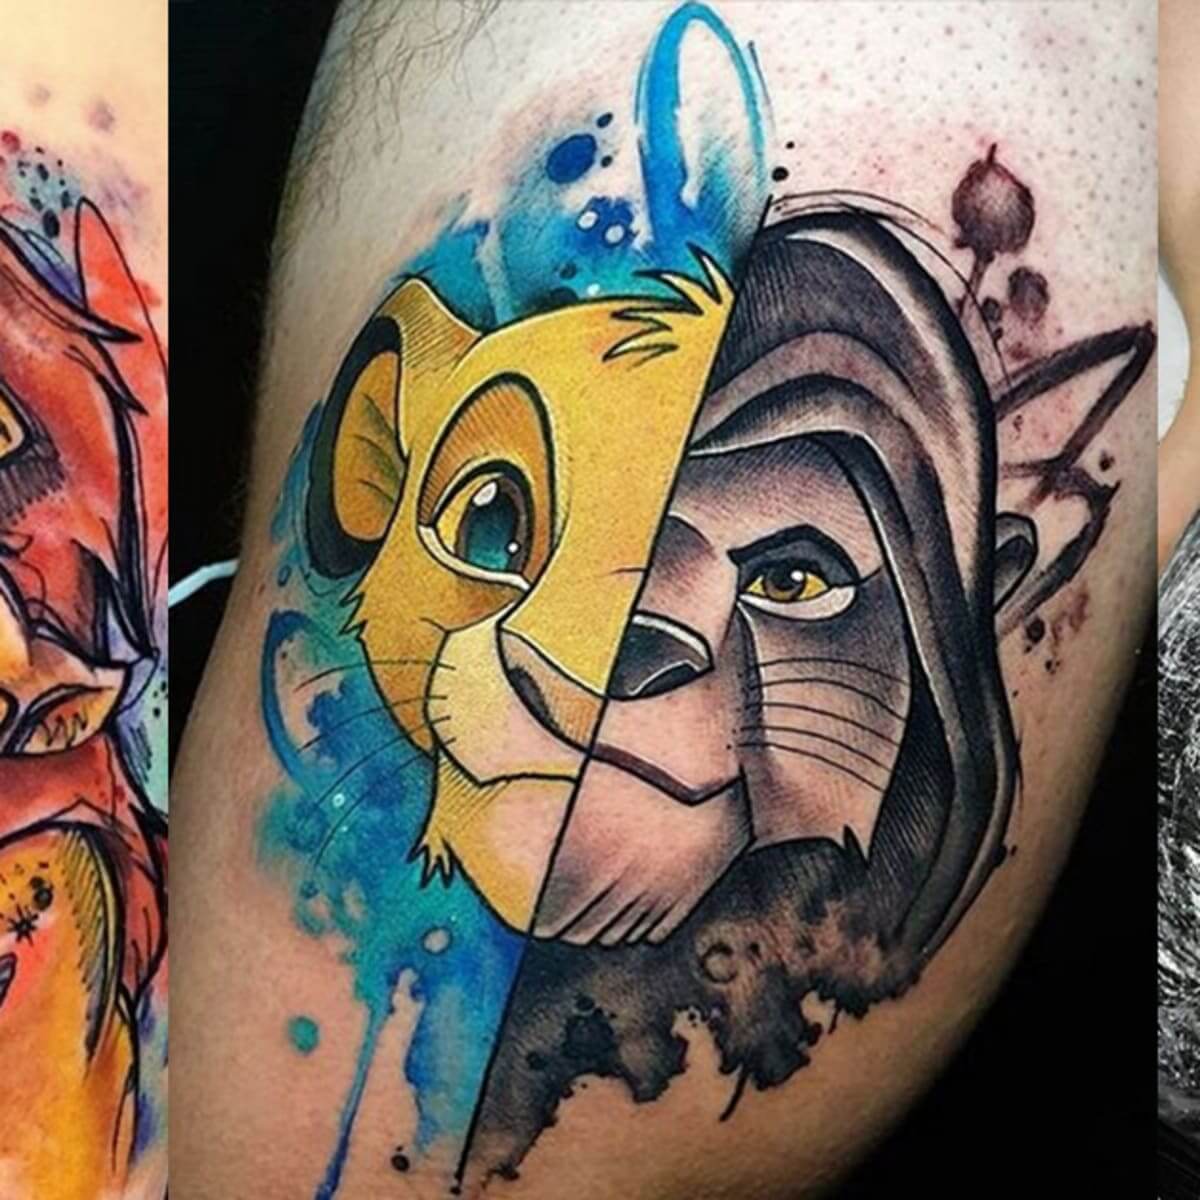 Lion- ‘The king’ Tattoo